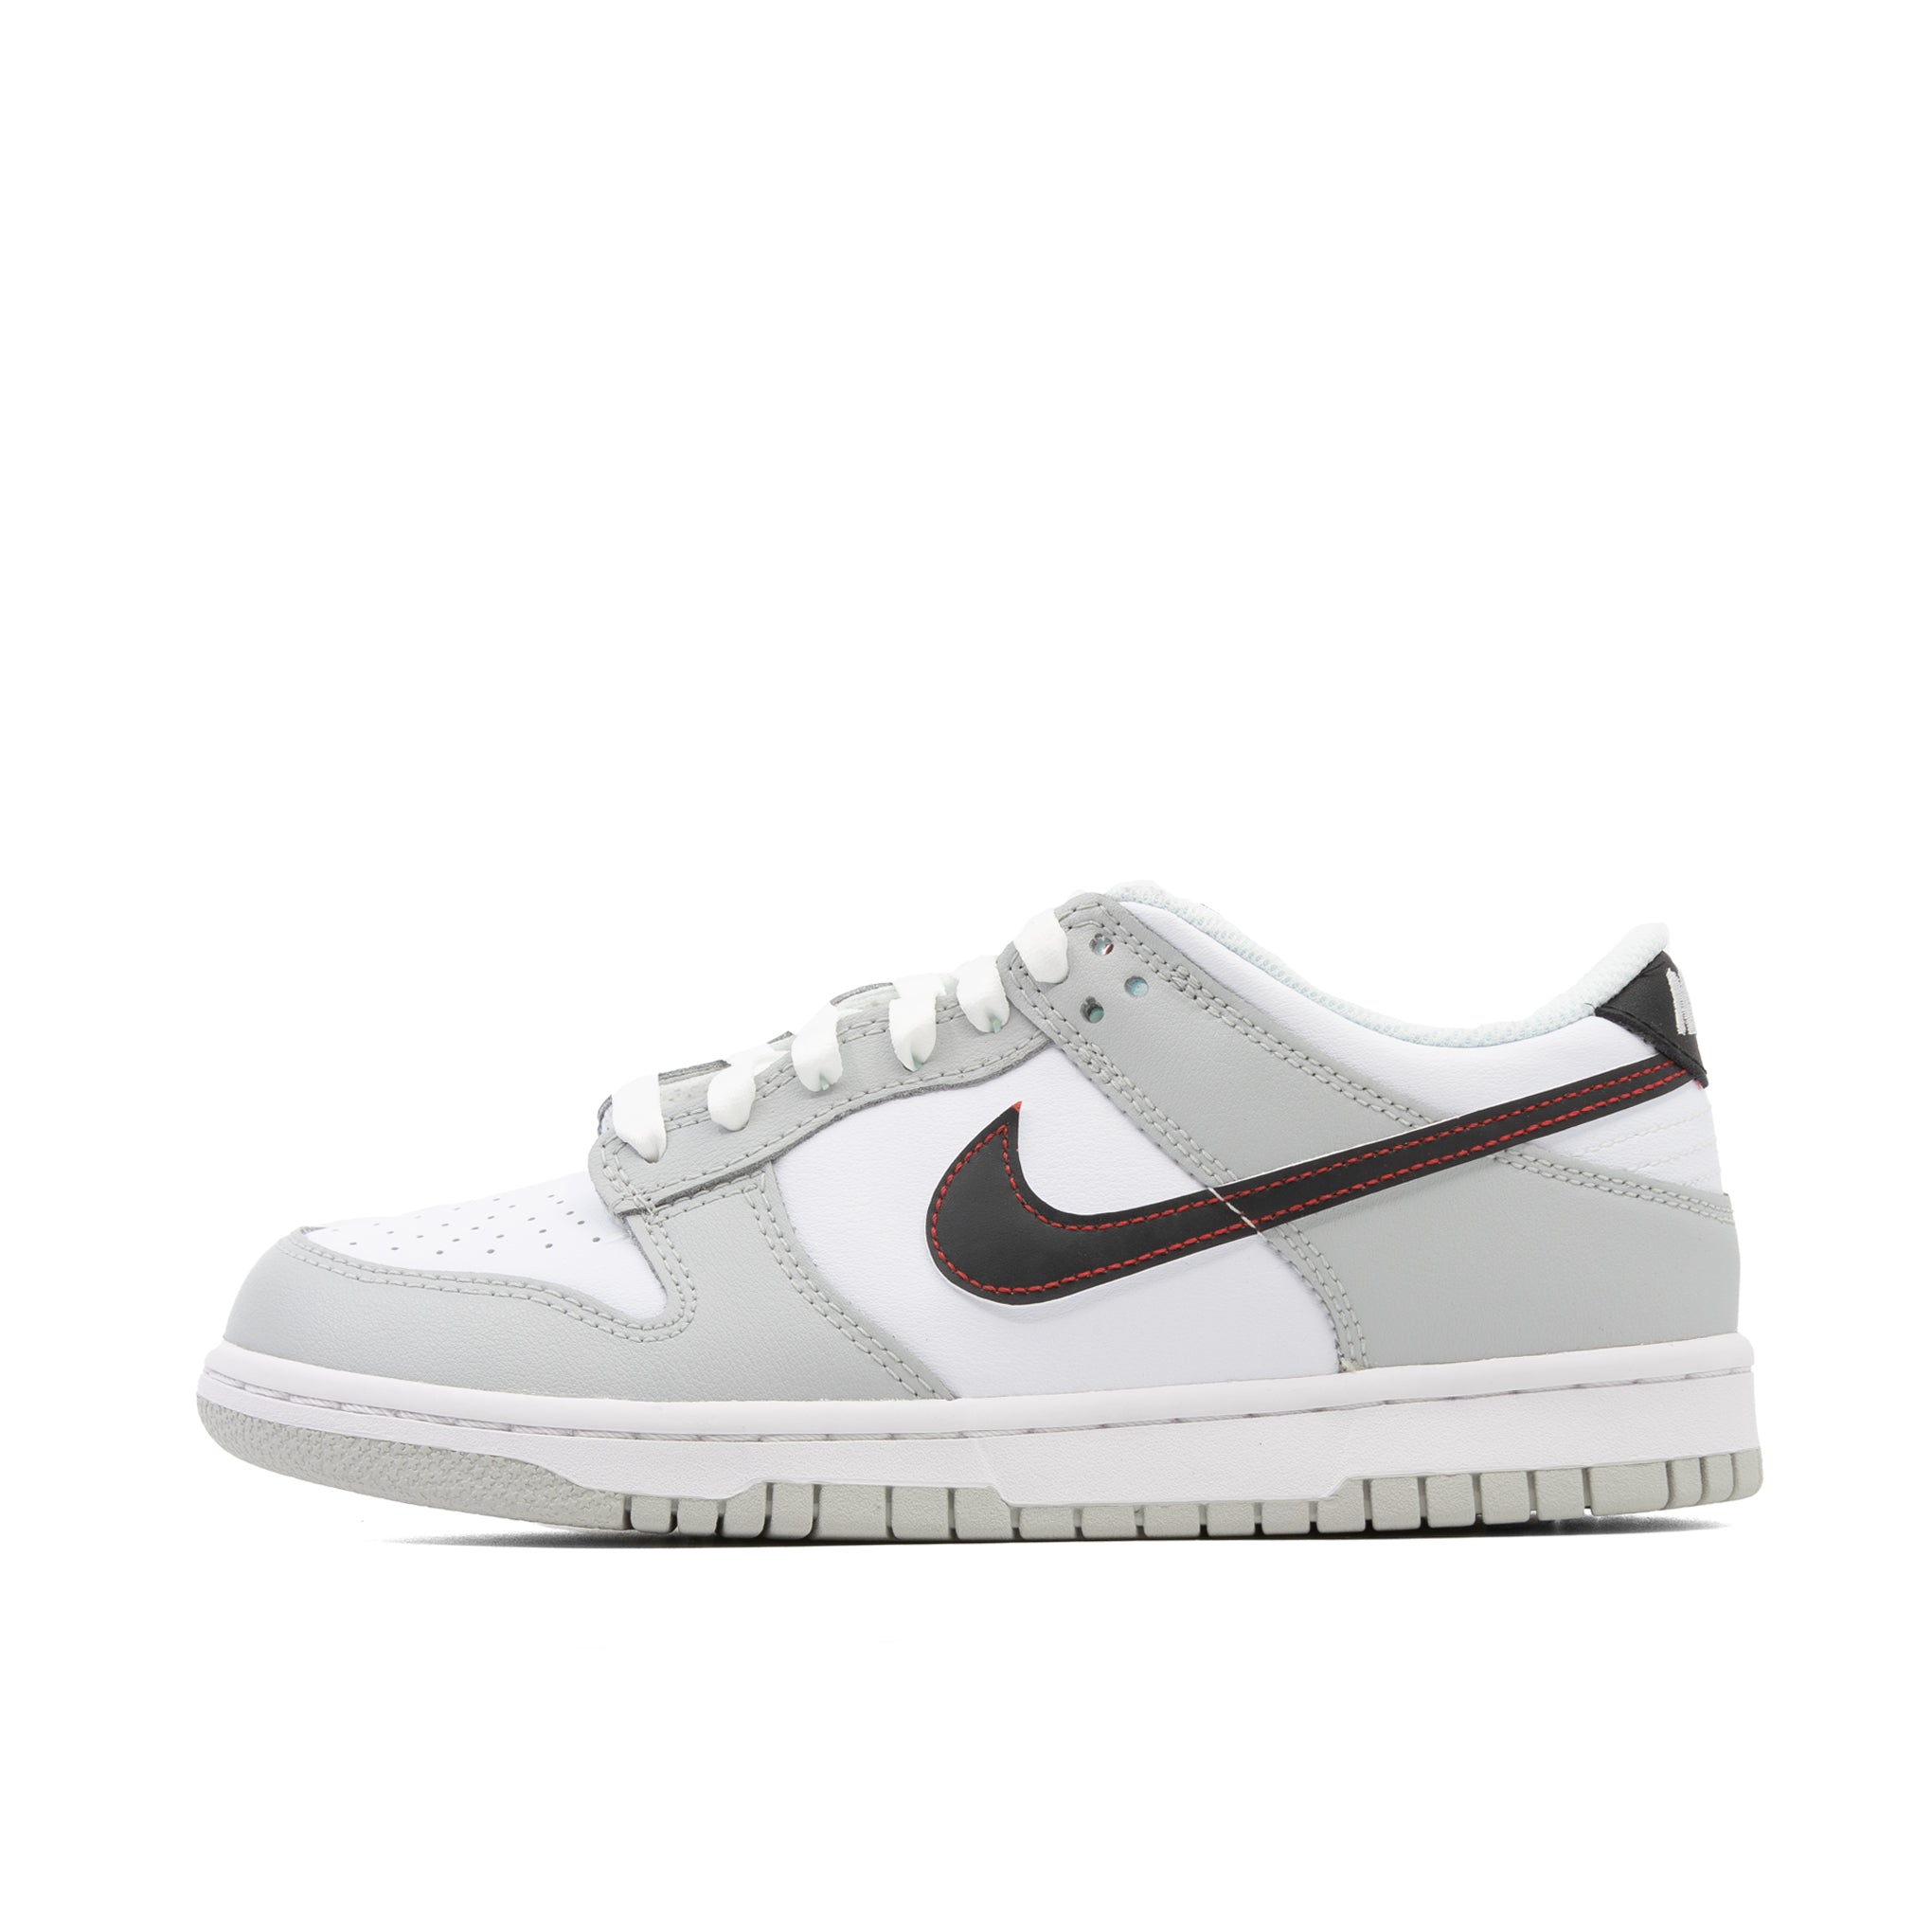 NIKE DUNK LOW GS LOTERY PACK GRIS NIEBLA